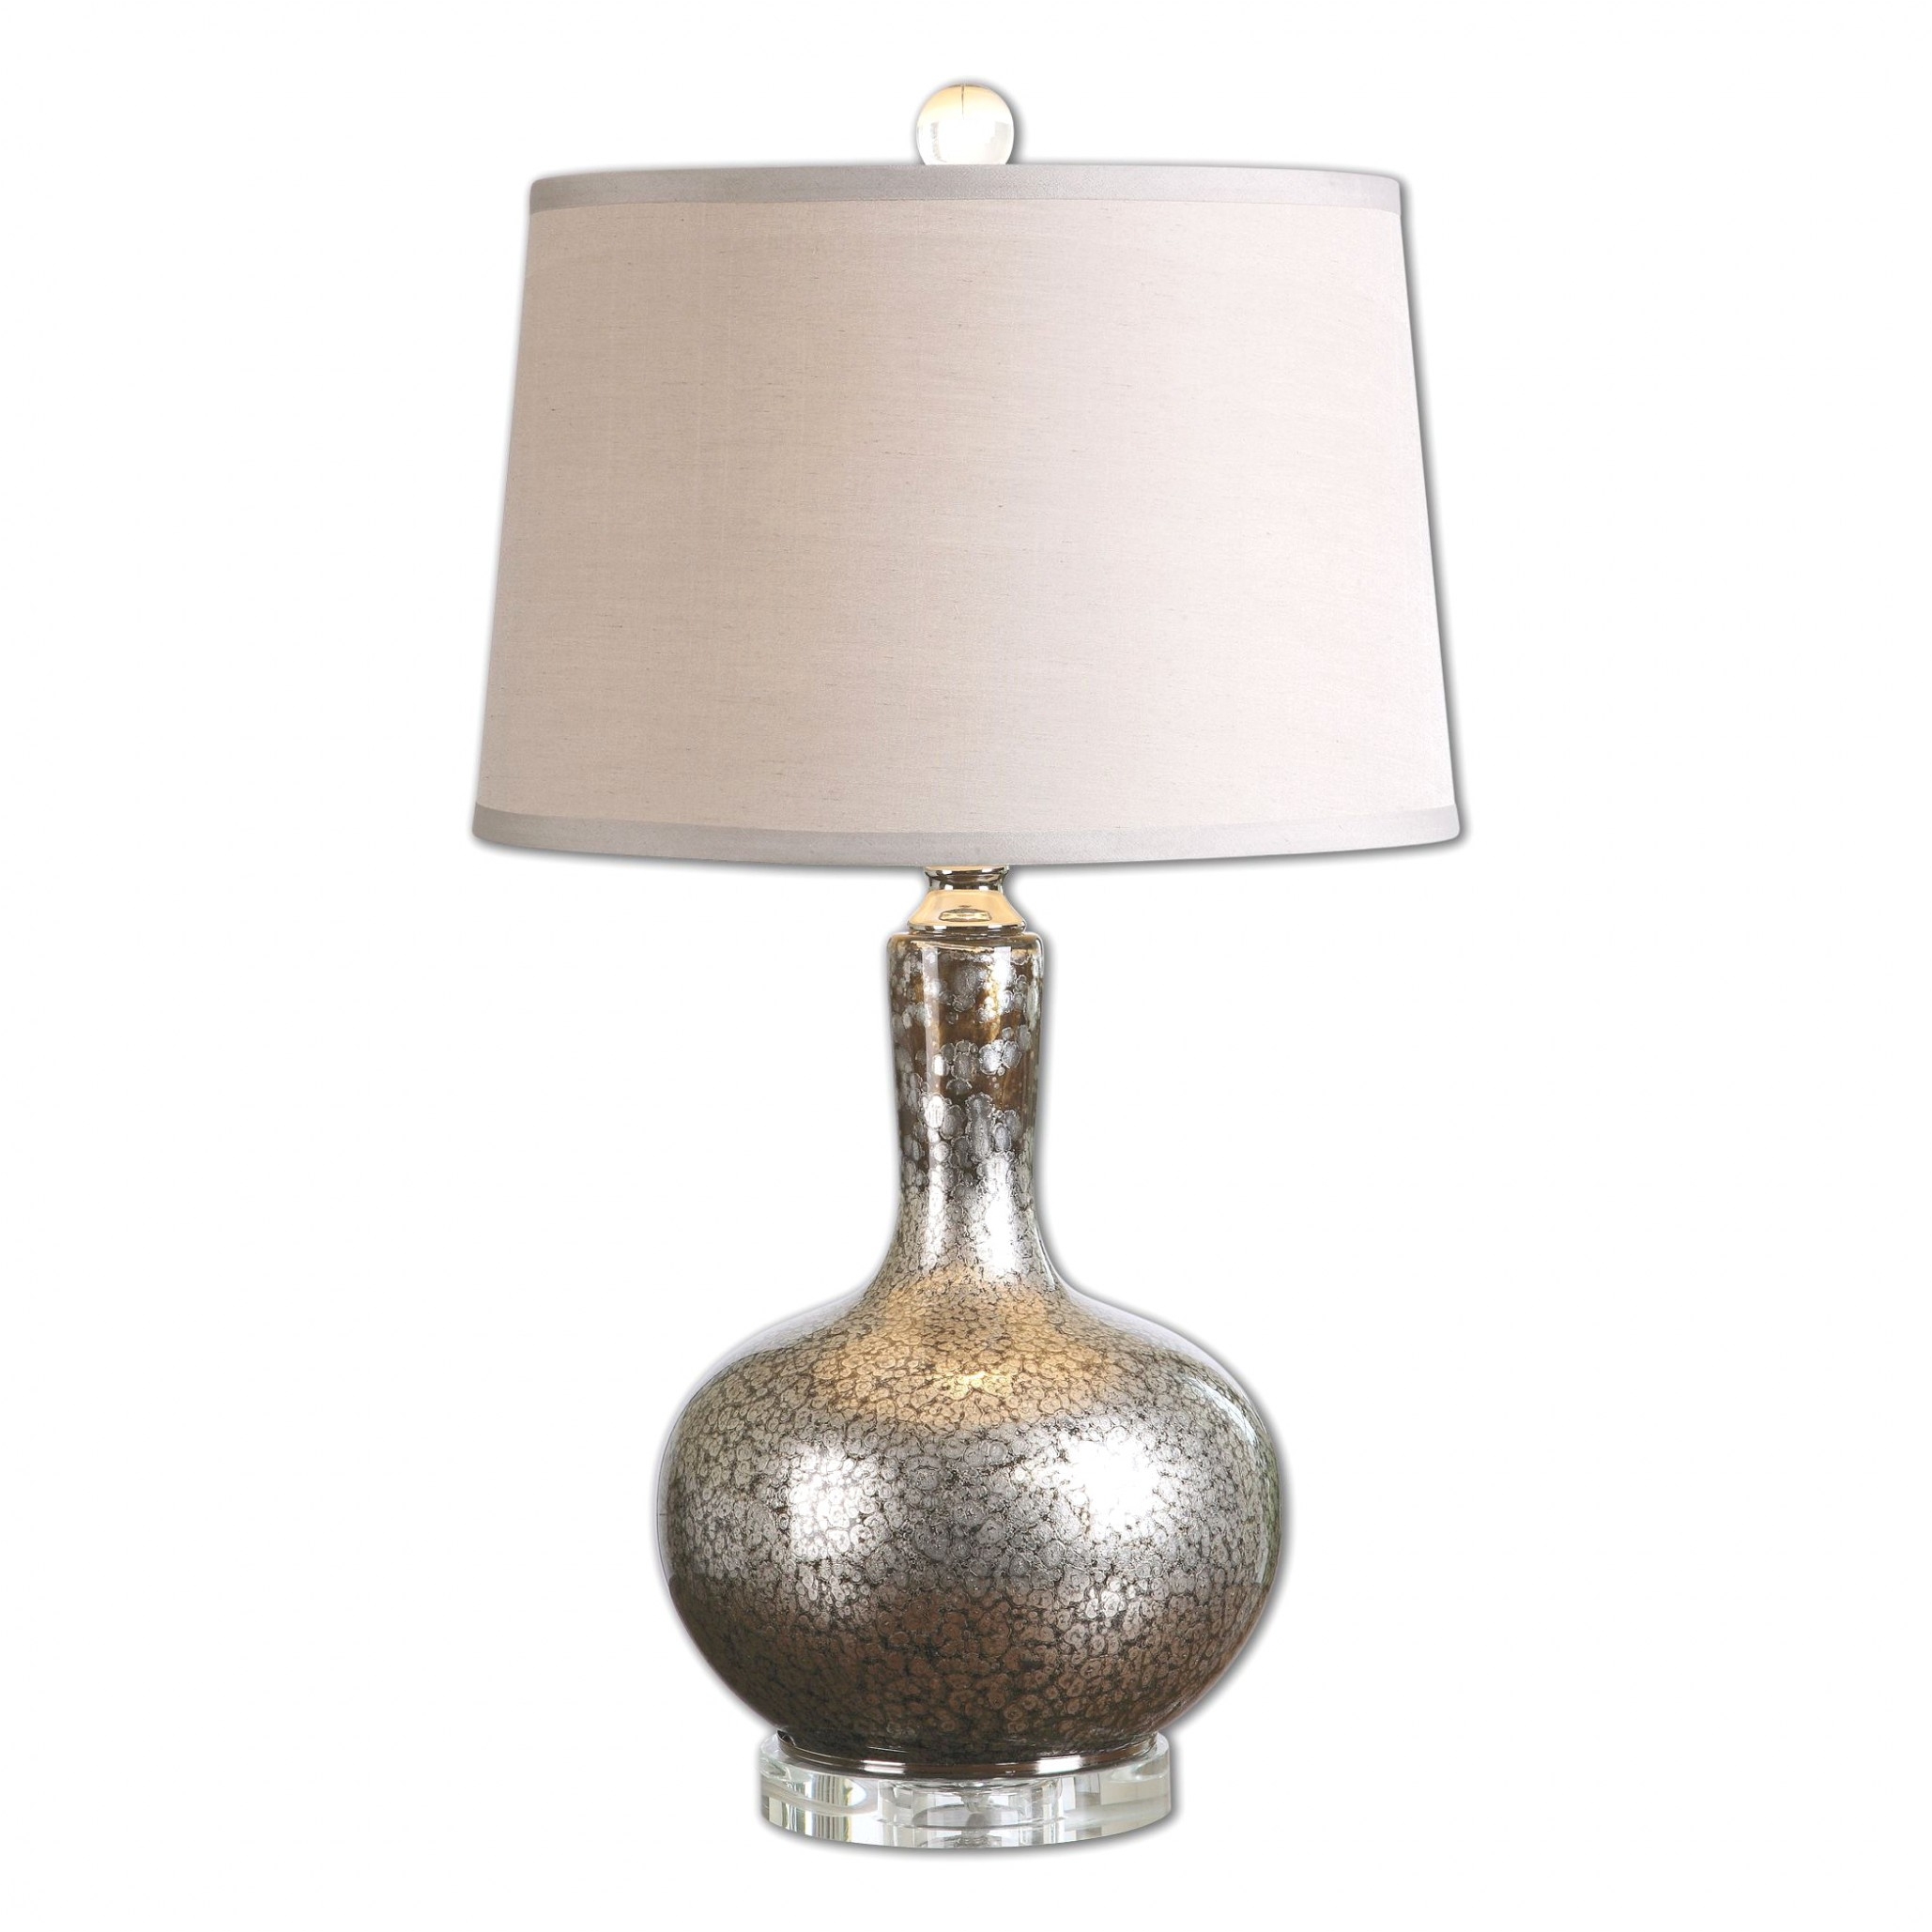 gorgeous standing lamps for bedroom or lamp lamp unique contemporary table lamp free table lamps 0d design